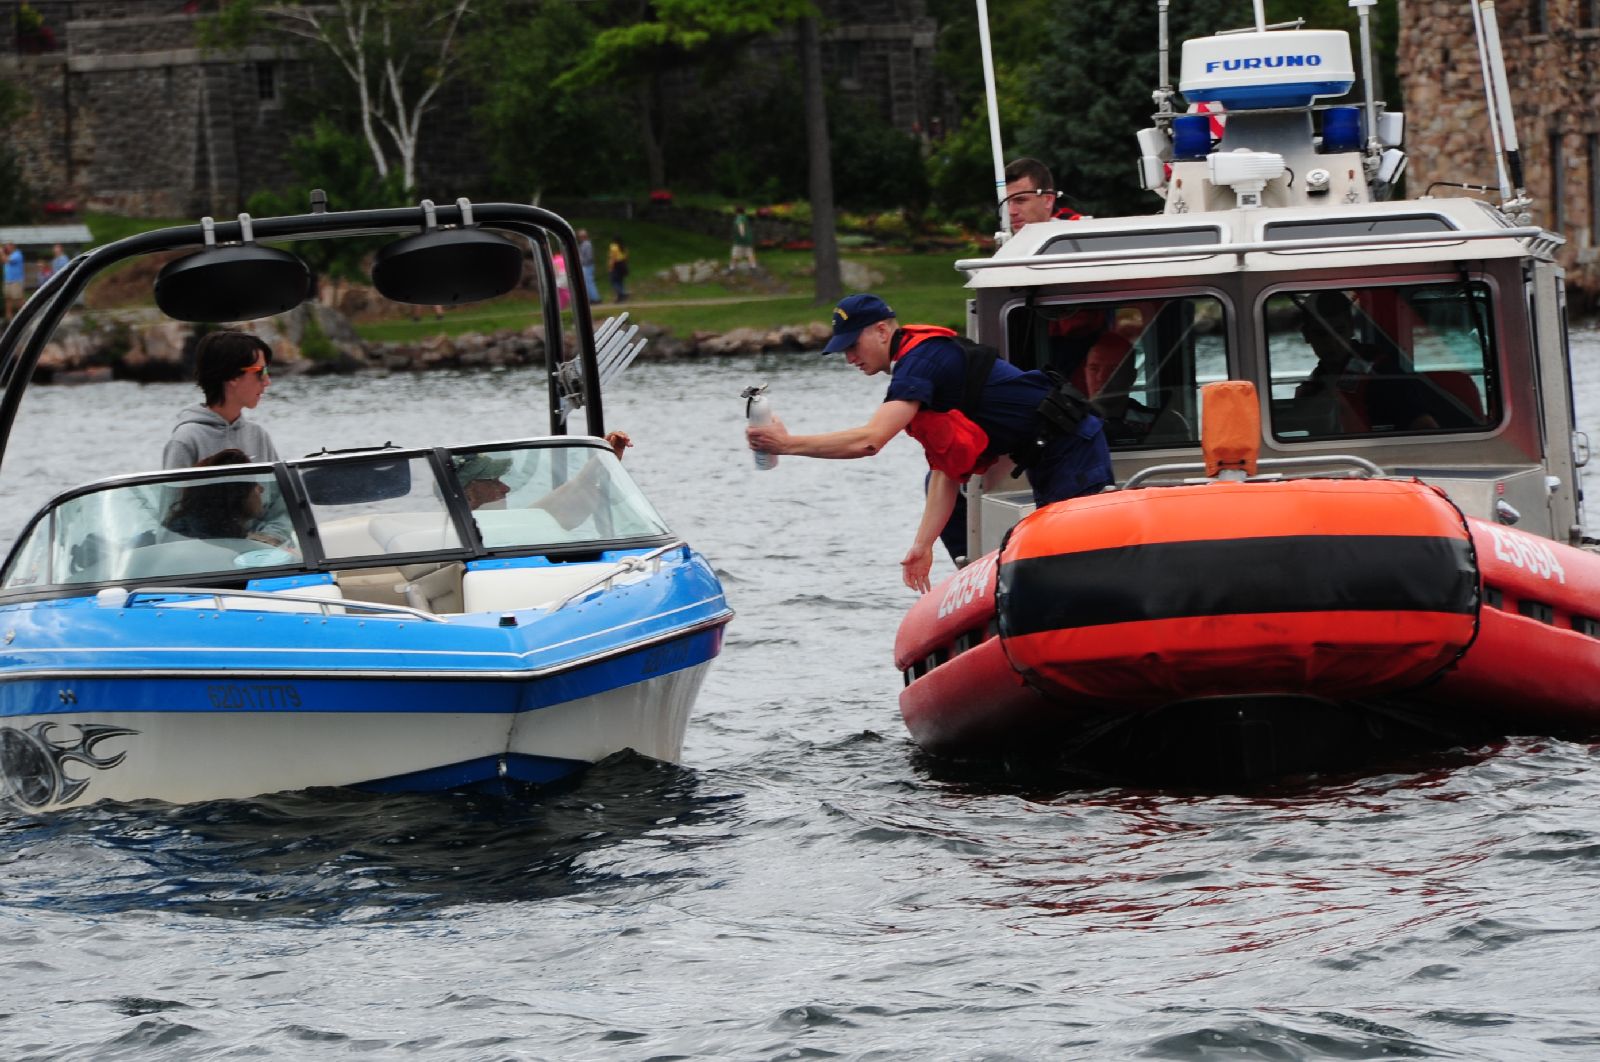 New USCG Rule: Update Boat Fire Extinguishers by April 20